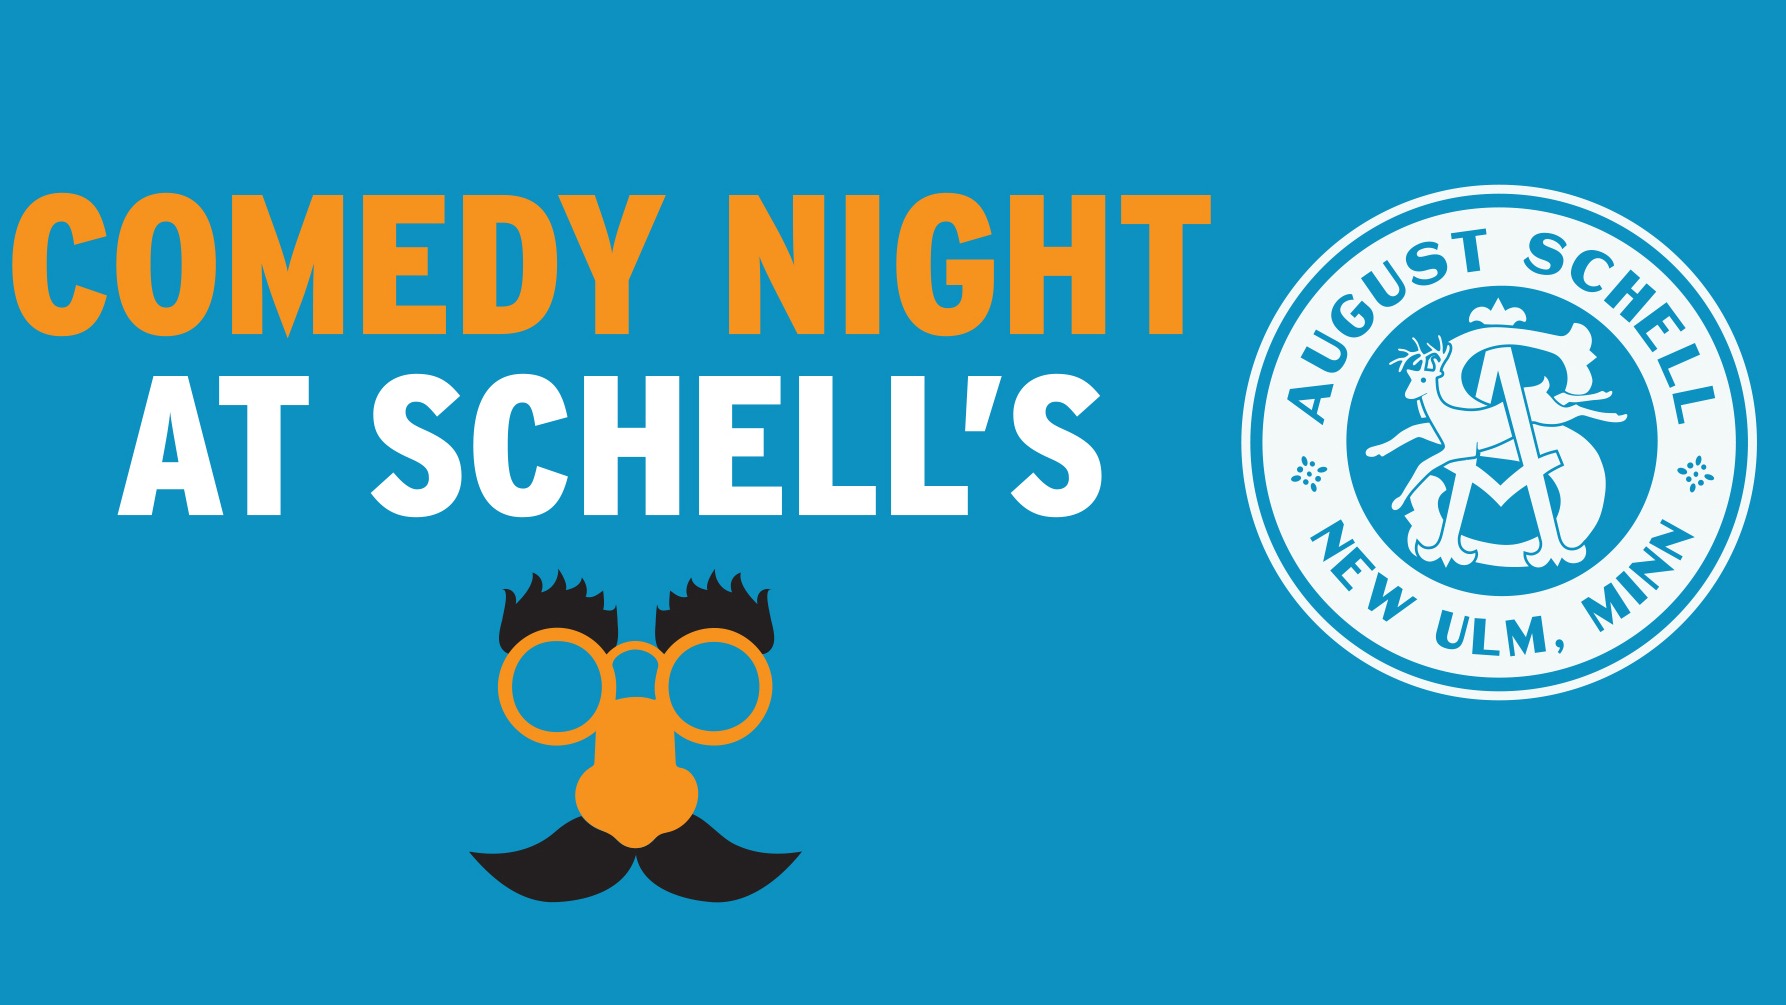 "COMEDY NIGHT AT SCHELL'S" with a graphic including eyebrows, glasses, a big nose and mustache beneath the text. August Schell Brewing Co. circle seal logo to the right of the graphic.